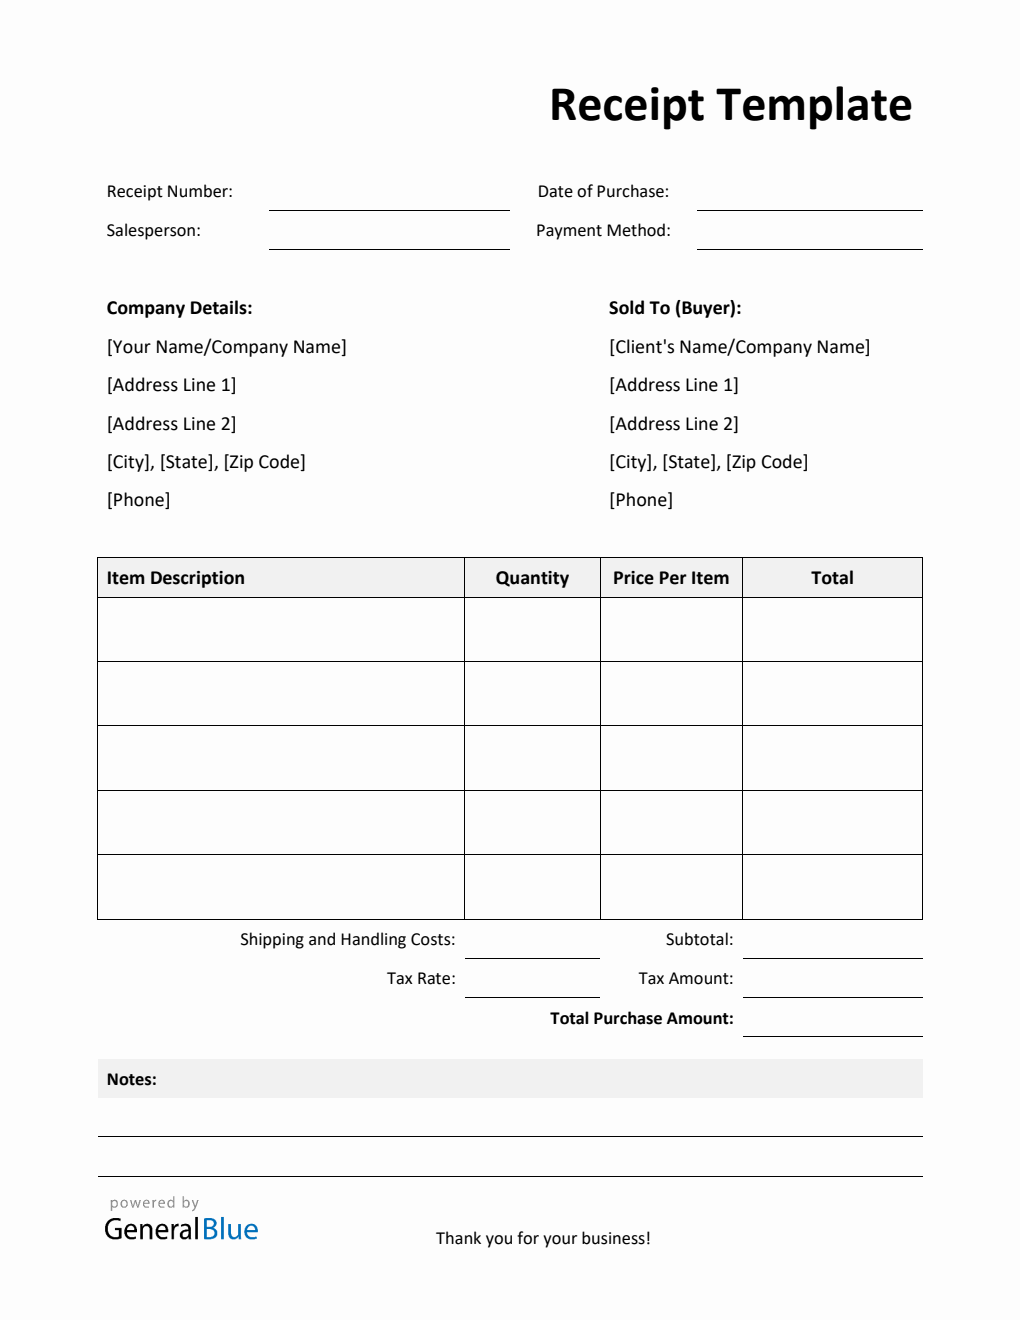 Basic Receipt Template with Notes in Word